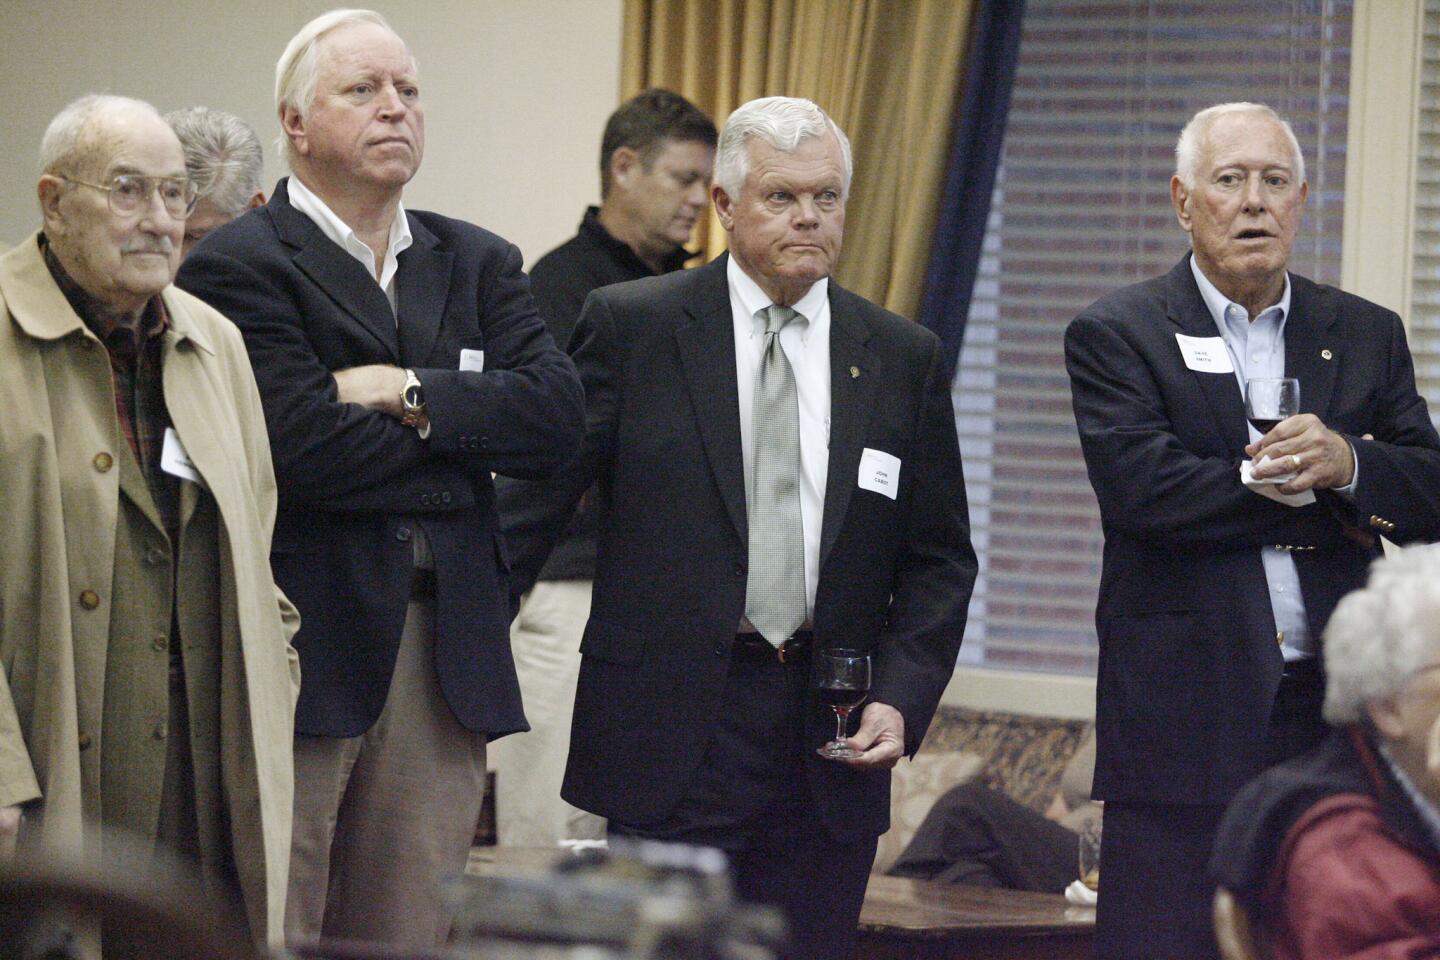 Bob Hemmings, from left, Ken Hemming, John Cabot and Dave Smith attend Anderson Business Technologies' 100th anniversary, which took placeat the University Club of Pasadena on Thursday, October 11, 2012.